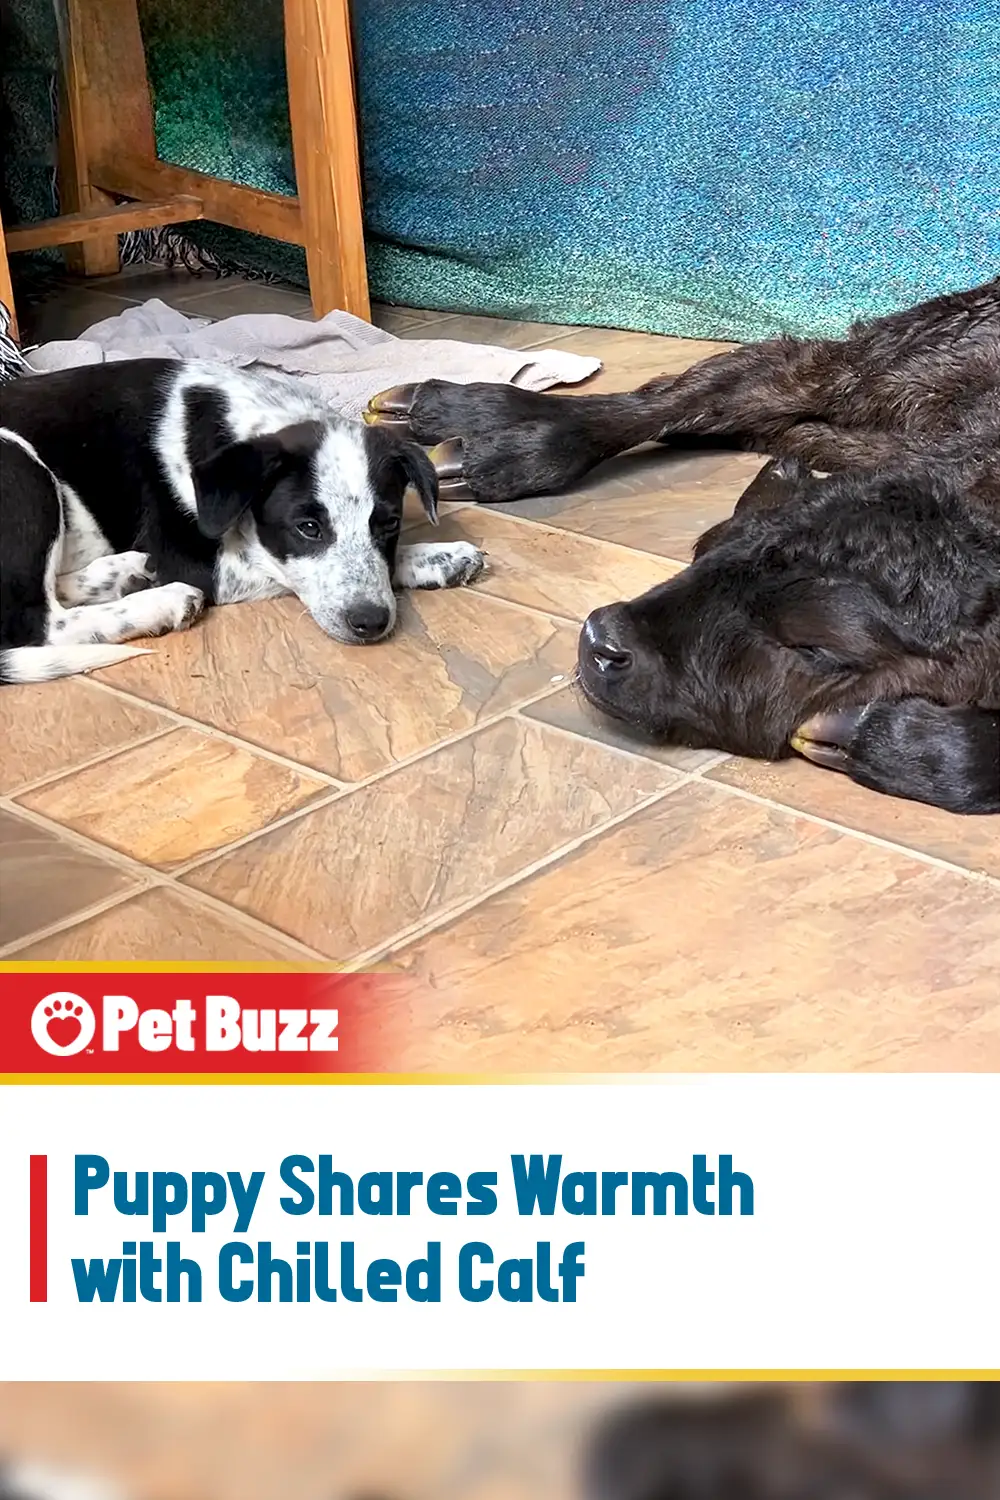 Puppy Shares Warmth with Chilled Calf